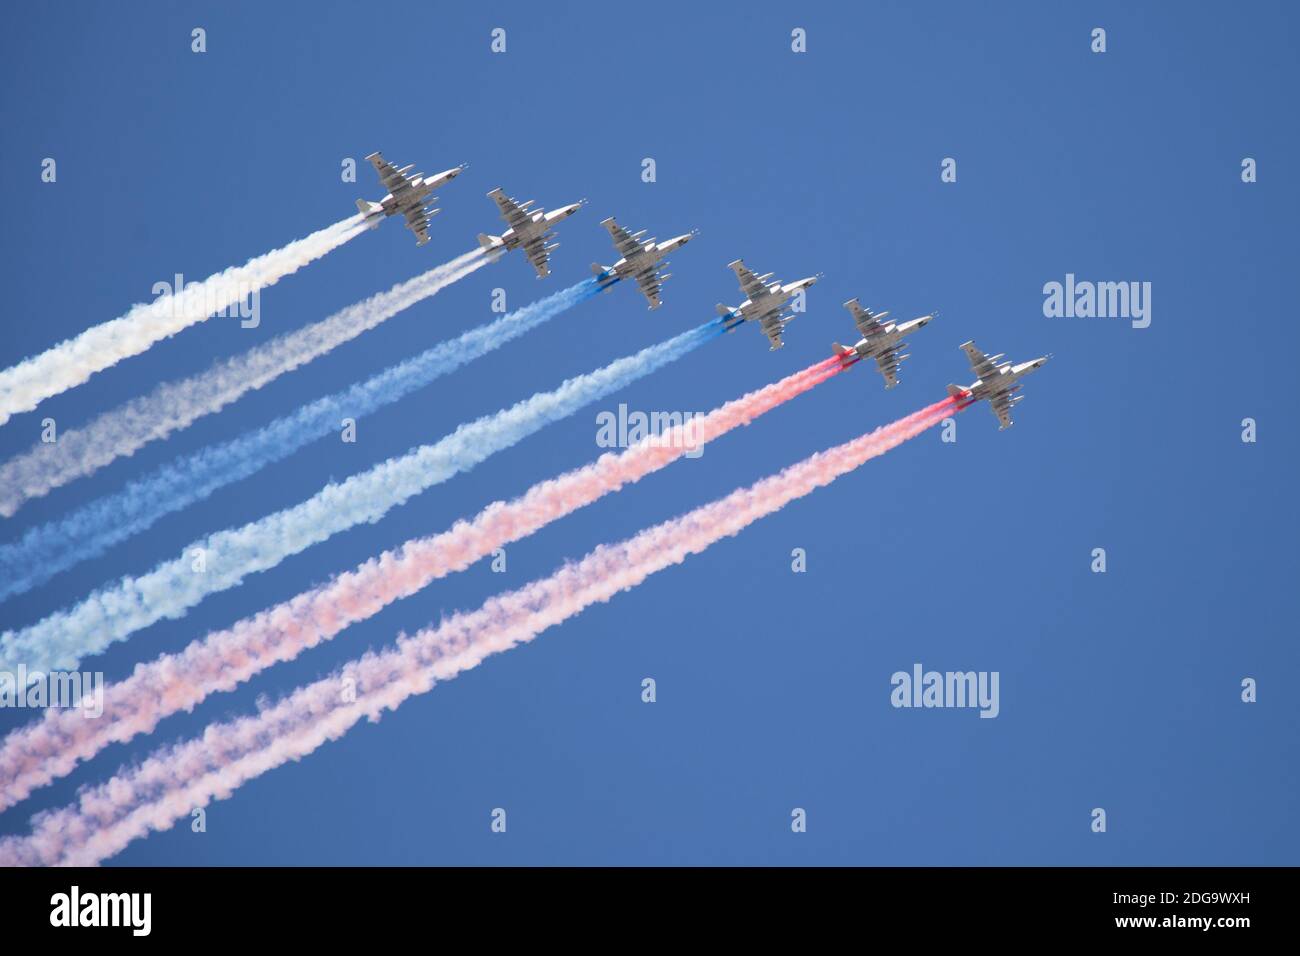 07.26.2020. Russia, St. Petersburg: Aviation parade. The military aviation parade on the Day of the Navy. A group of Su-25 attack aircraft draws the R Stock Photo